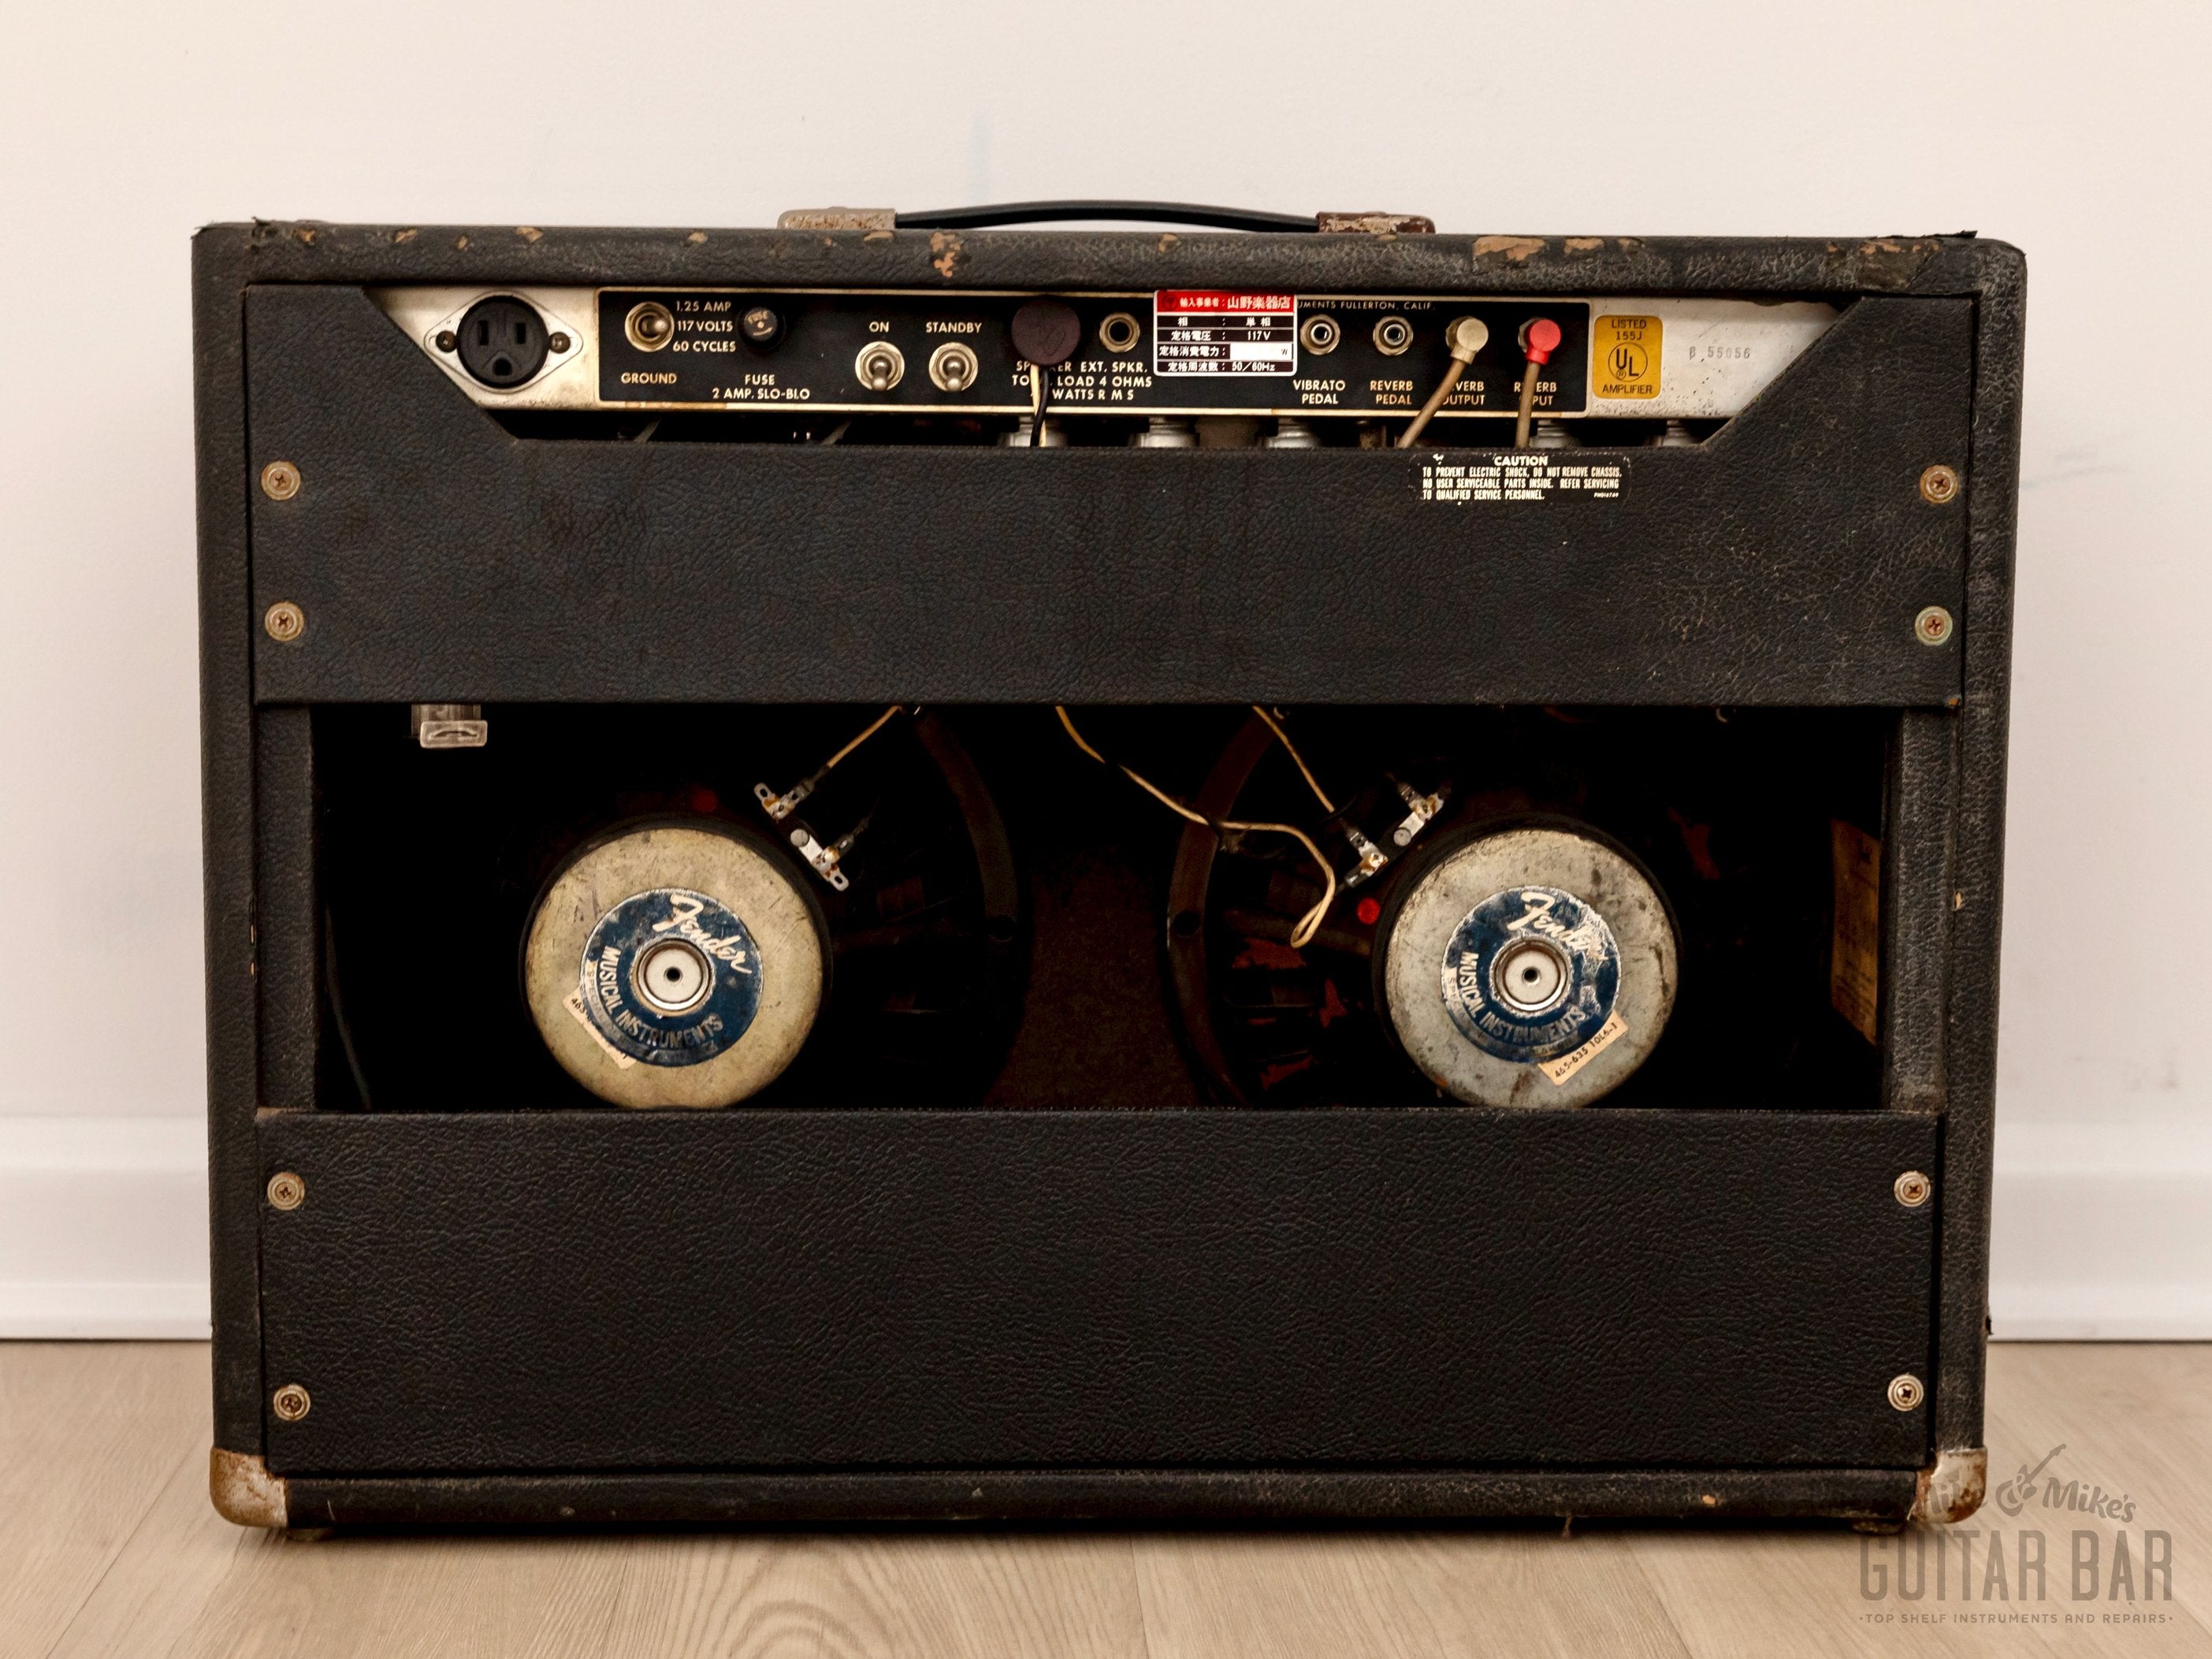 1976 Fender Vibrolux Reverb Silverface Vintage Tube Amp w/ Oxford 10L6 & Footswitch, Serviced